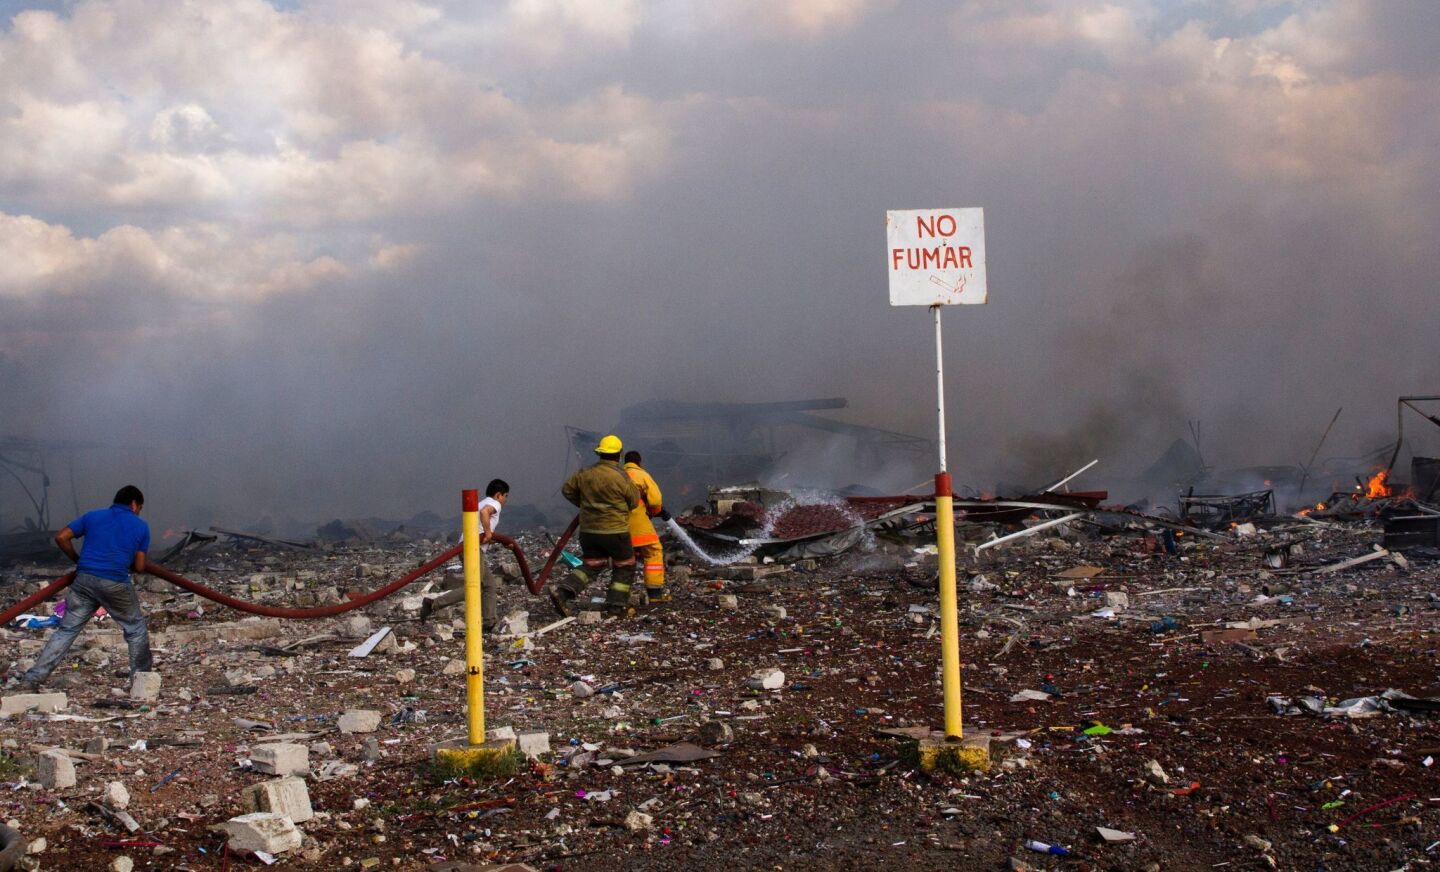 Firefighters work amid the smoldering debris left by explosions at a fireworks market north of Mexico City.